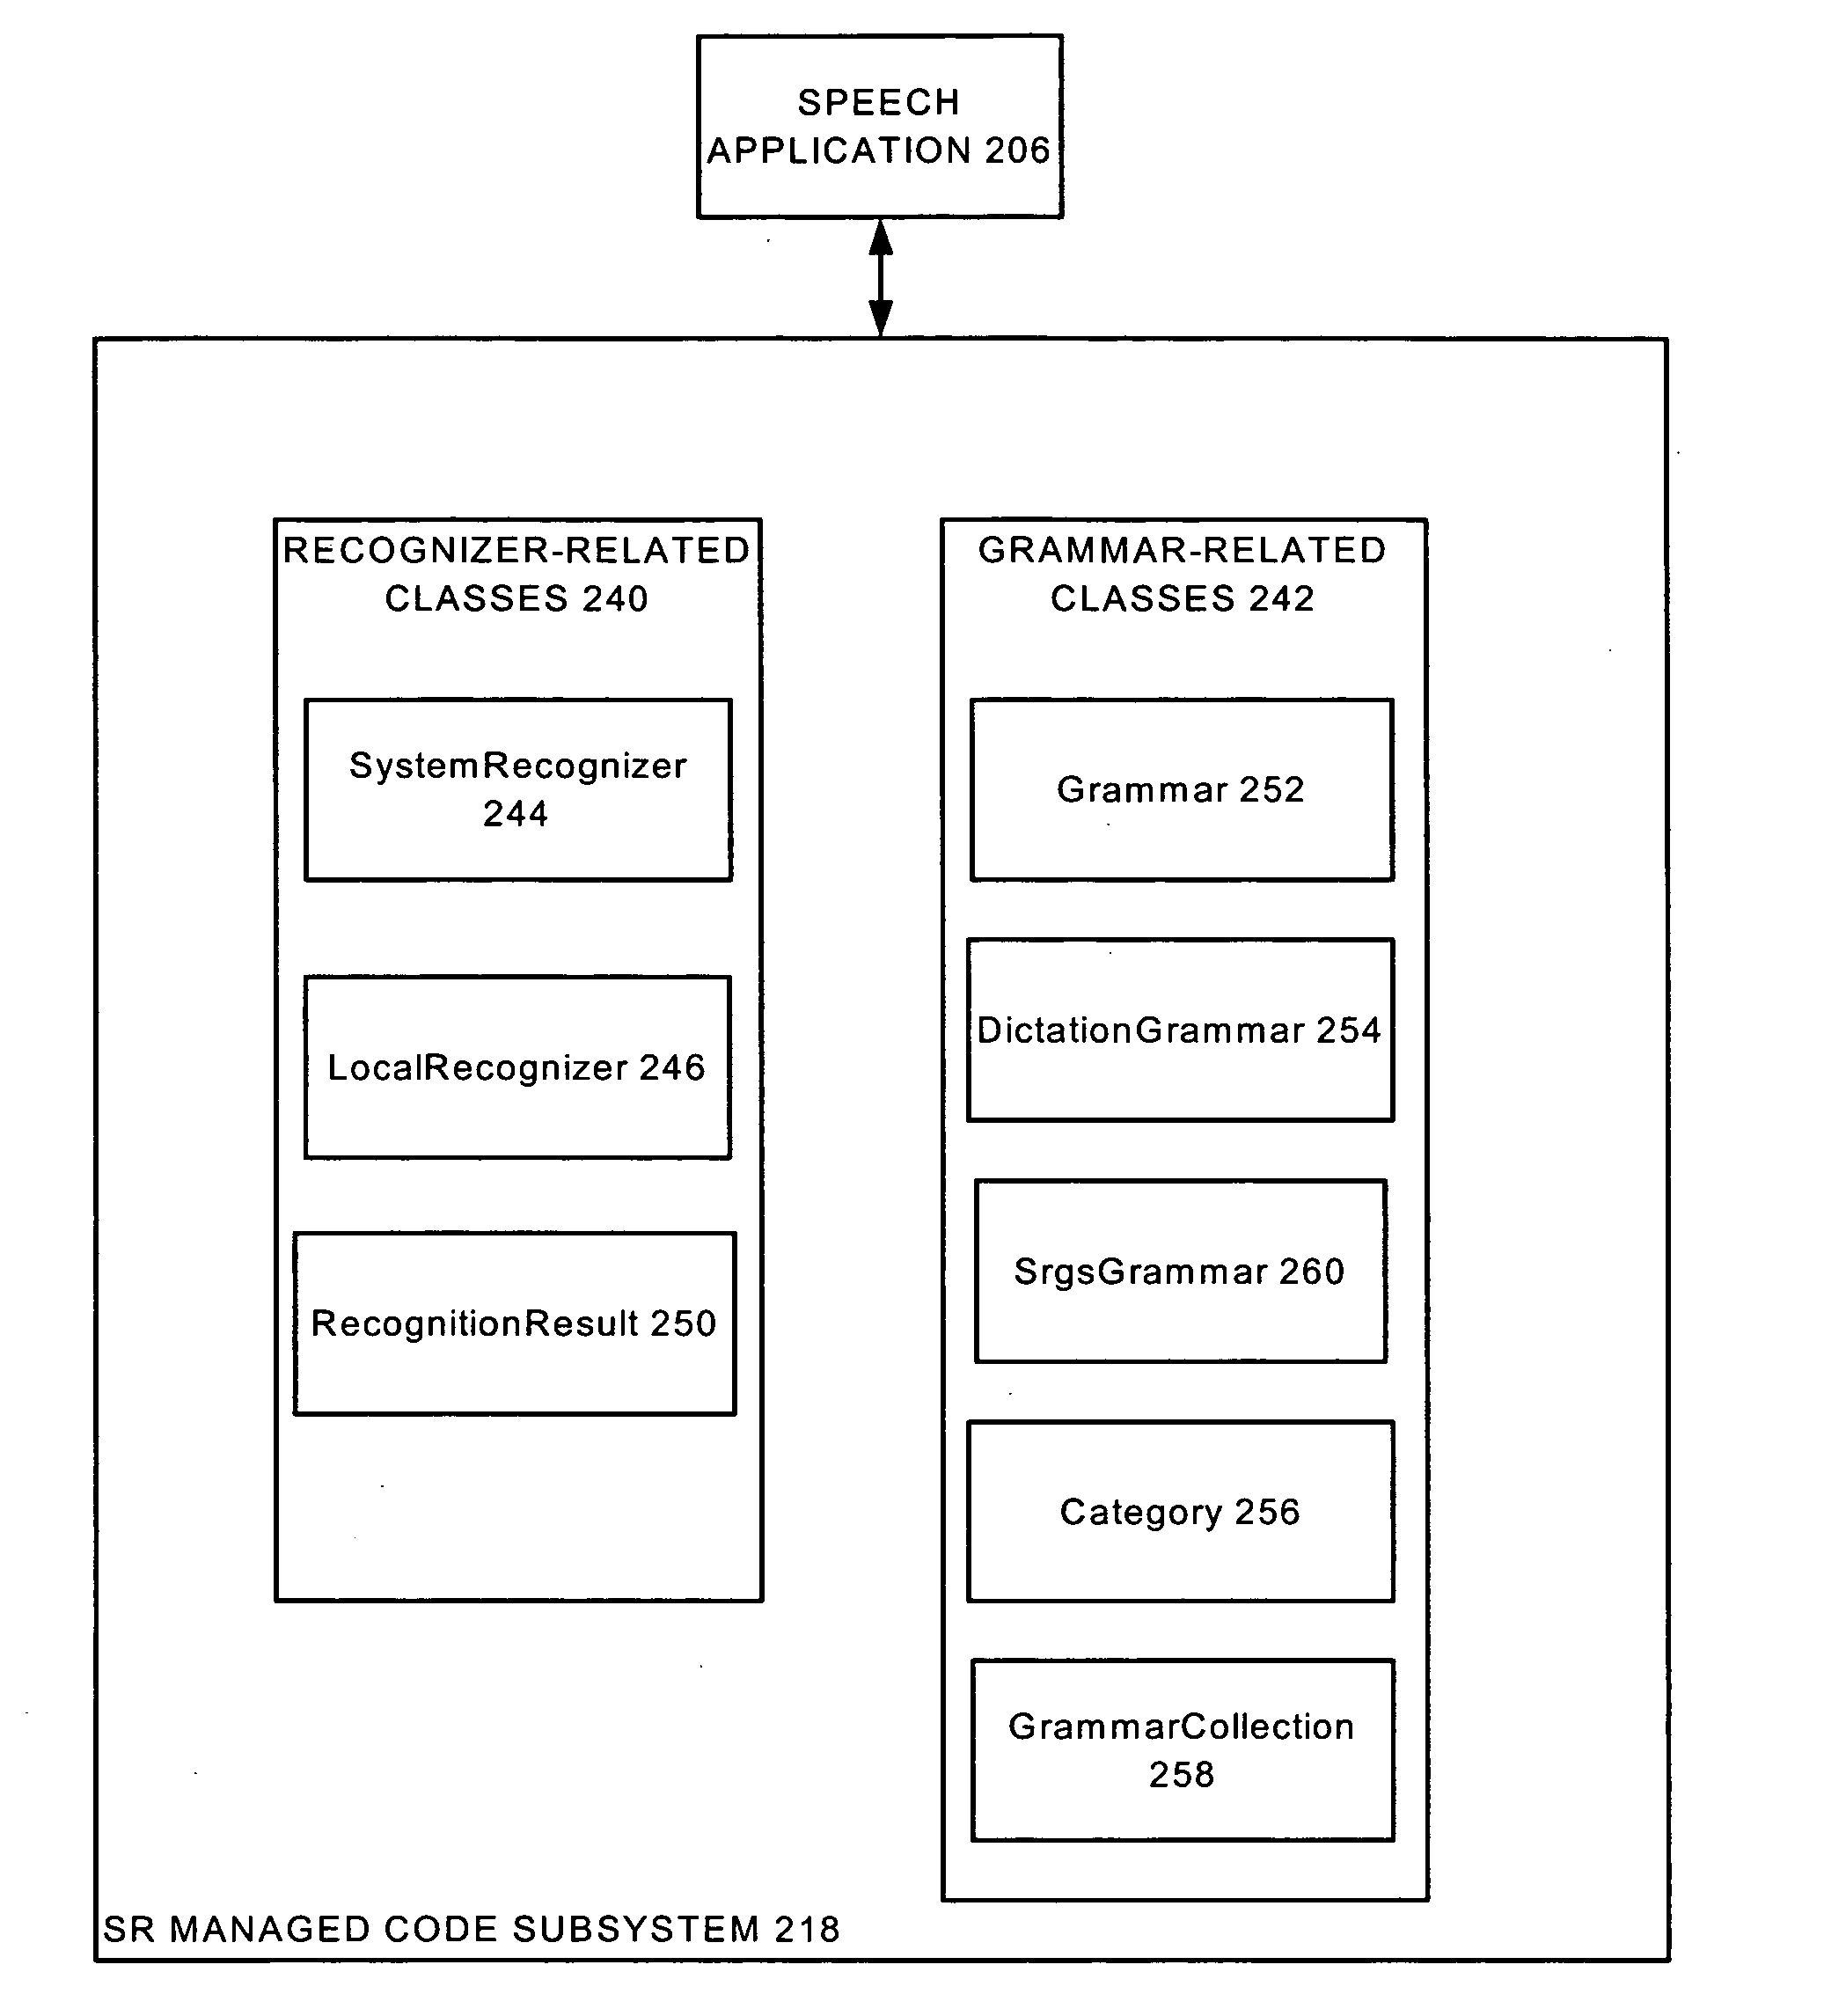 Speech-related object model and interface in managed code system